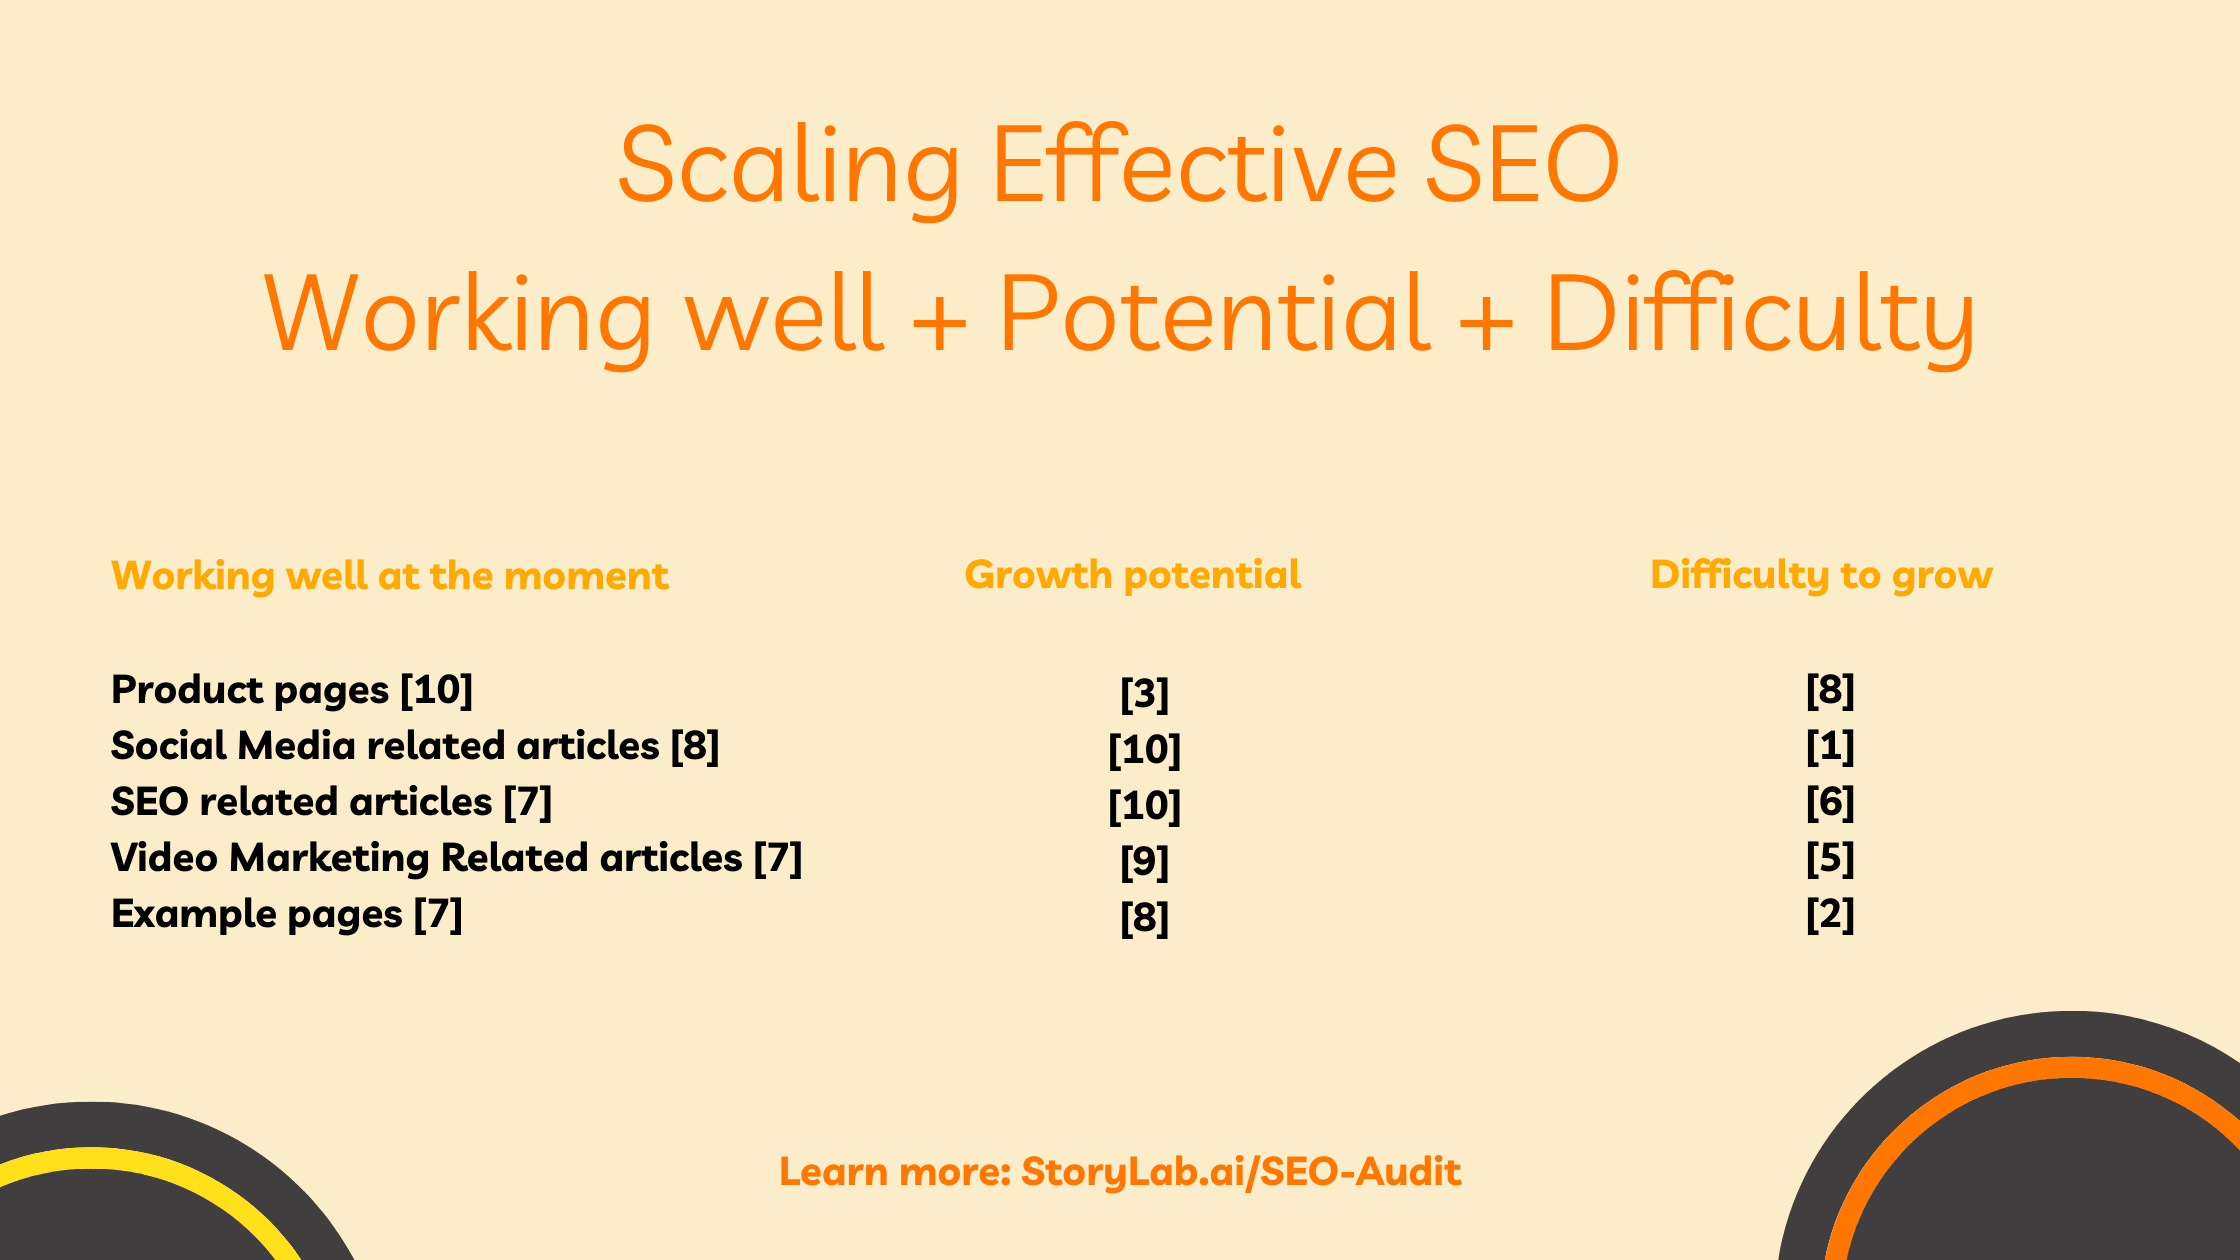 Scaling Effective SEO Working well - Potential - Difficulty